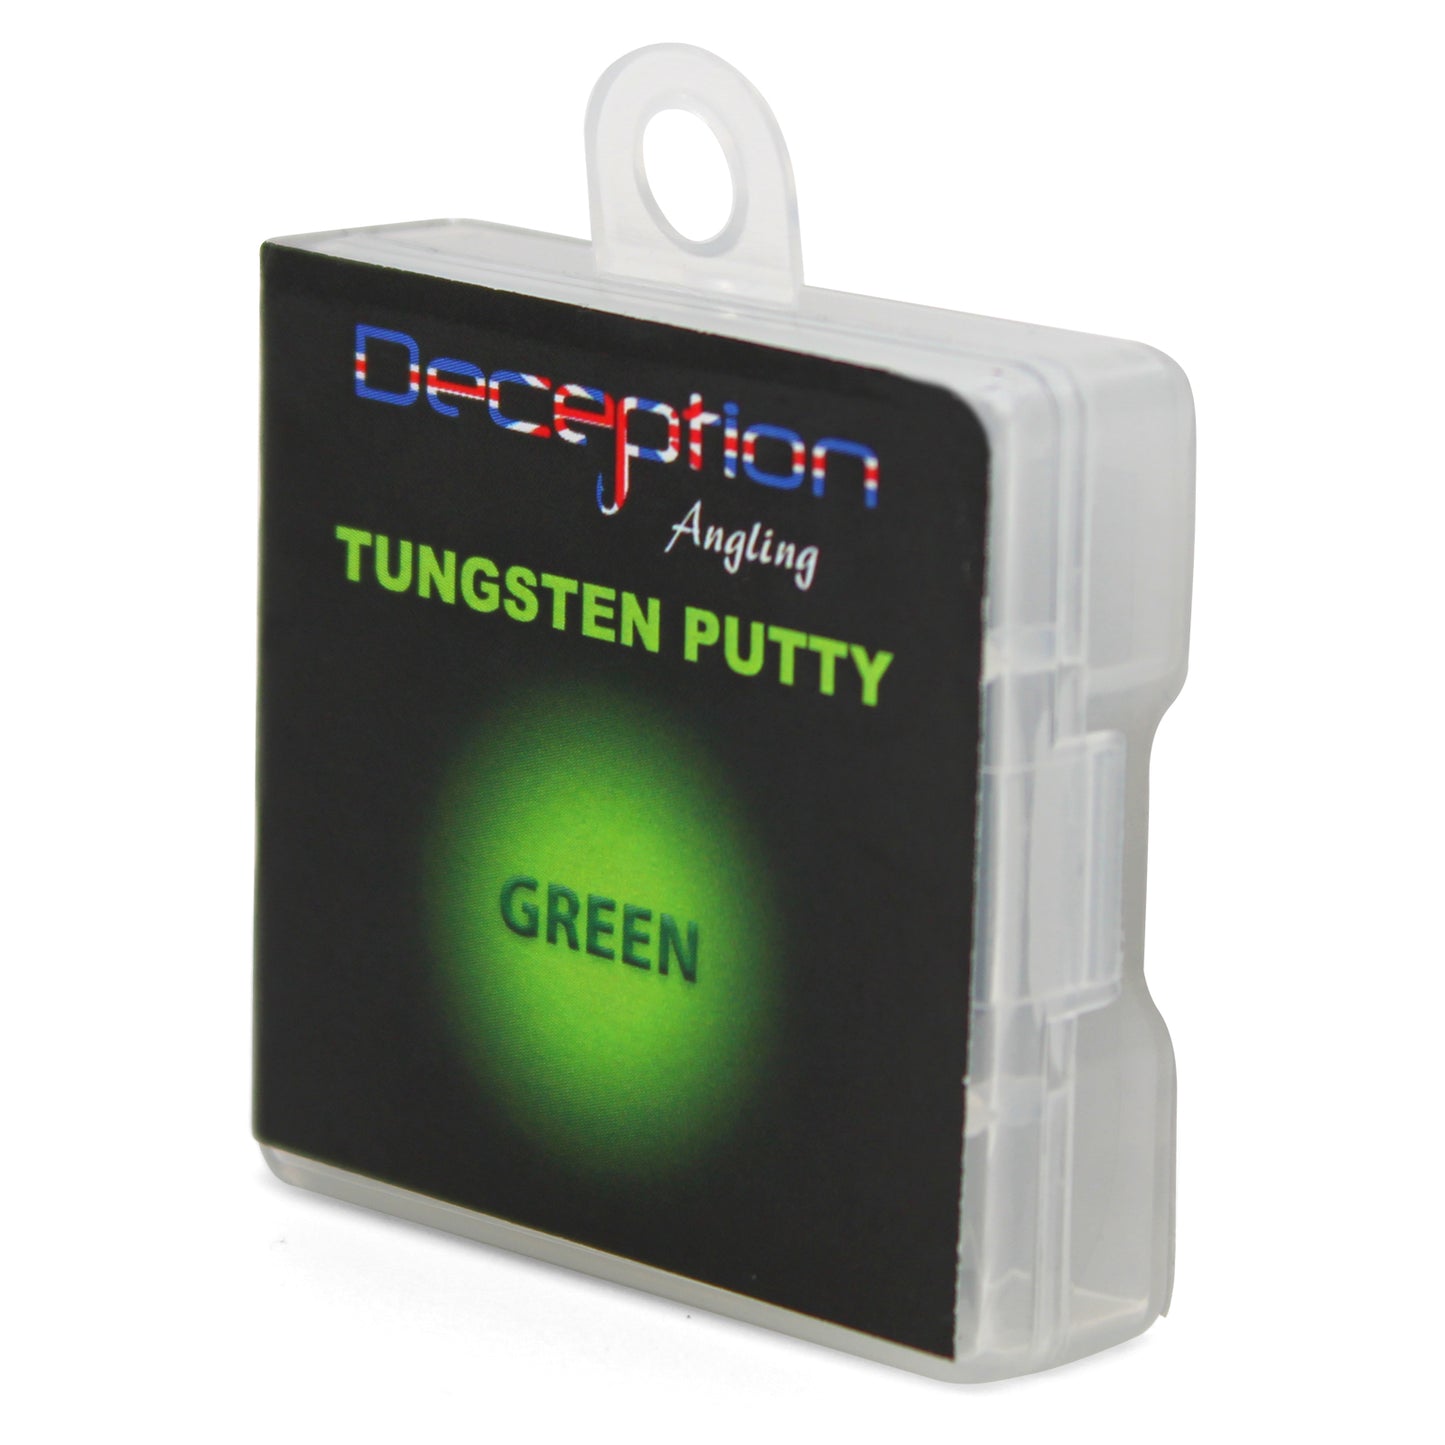 Deception Angling Tungsten Putty for Fishing - Green